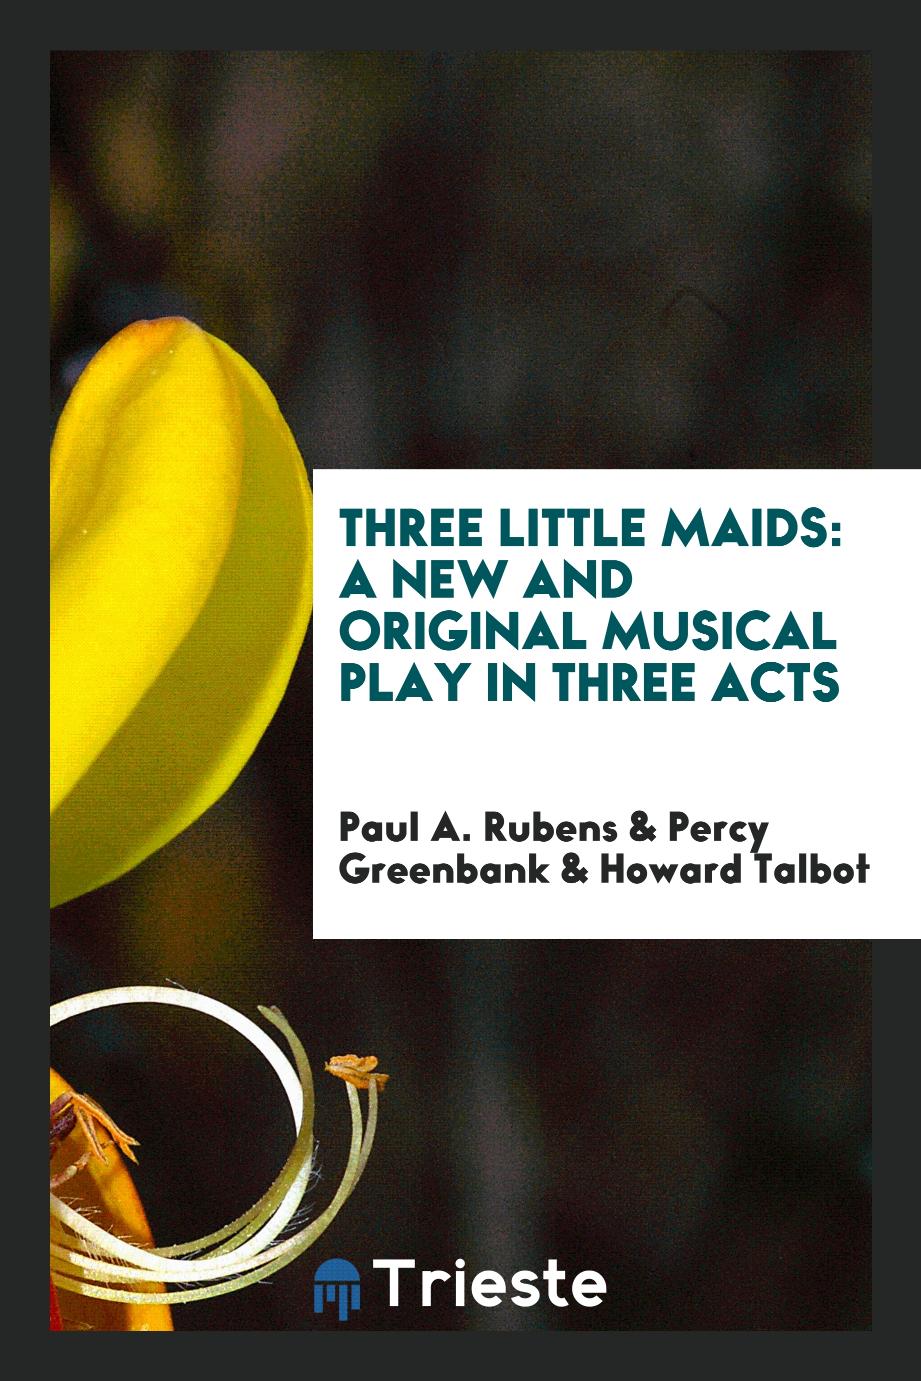 Three Little Maids: A New and Original Musical Play in Three Acts